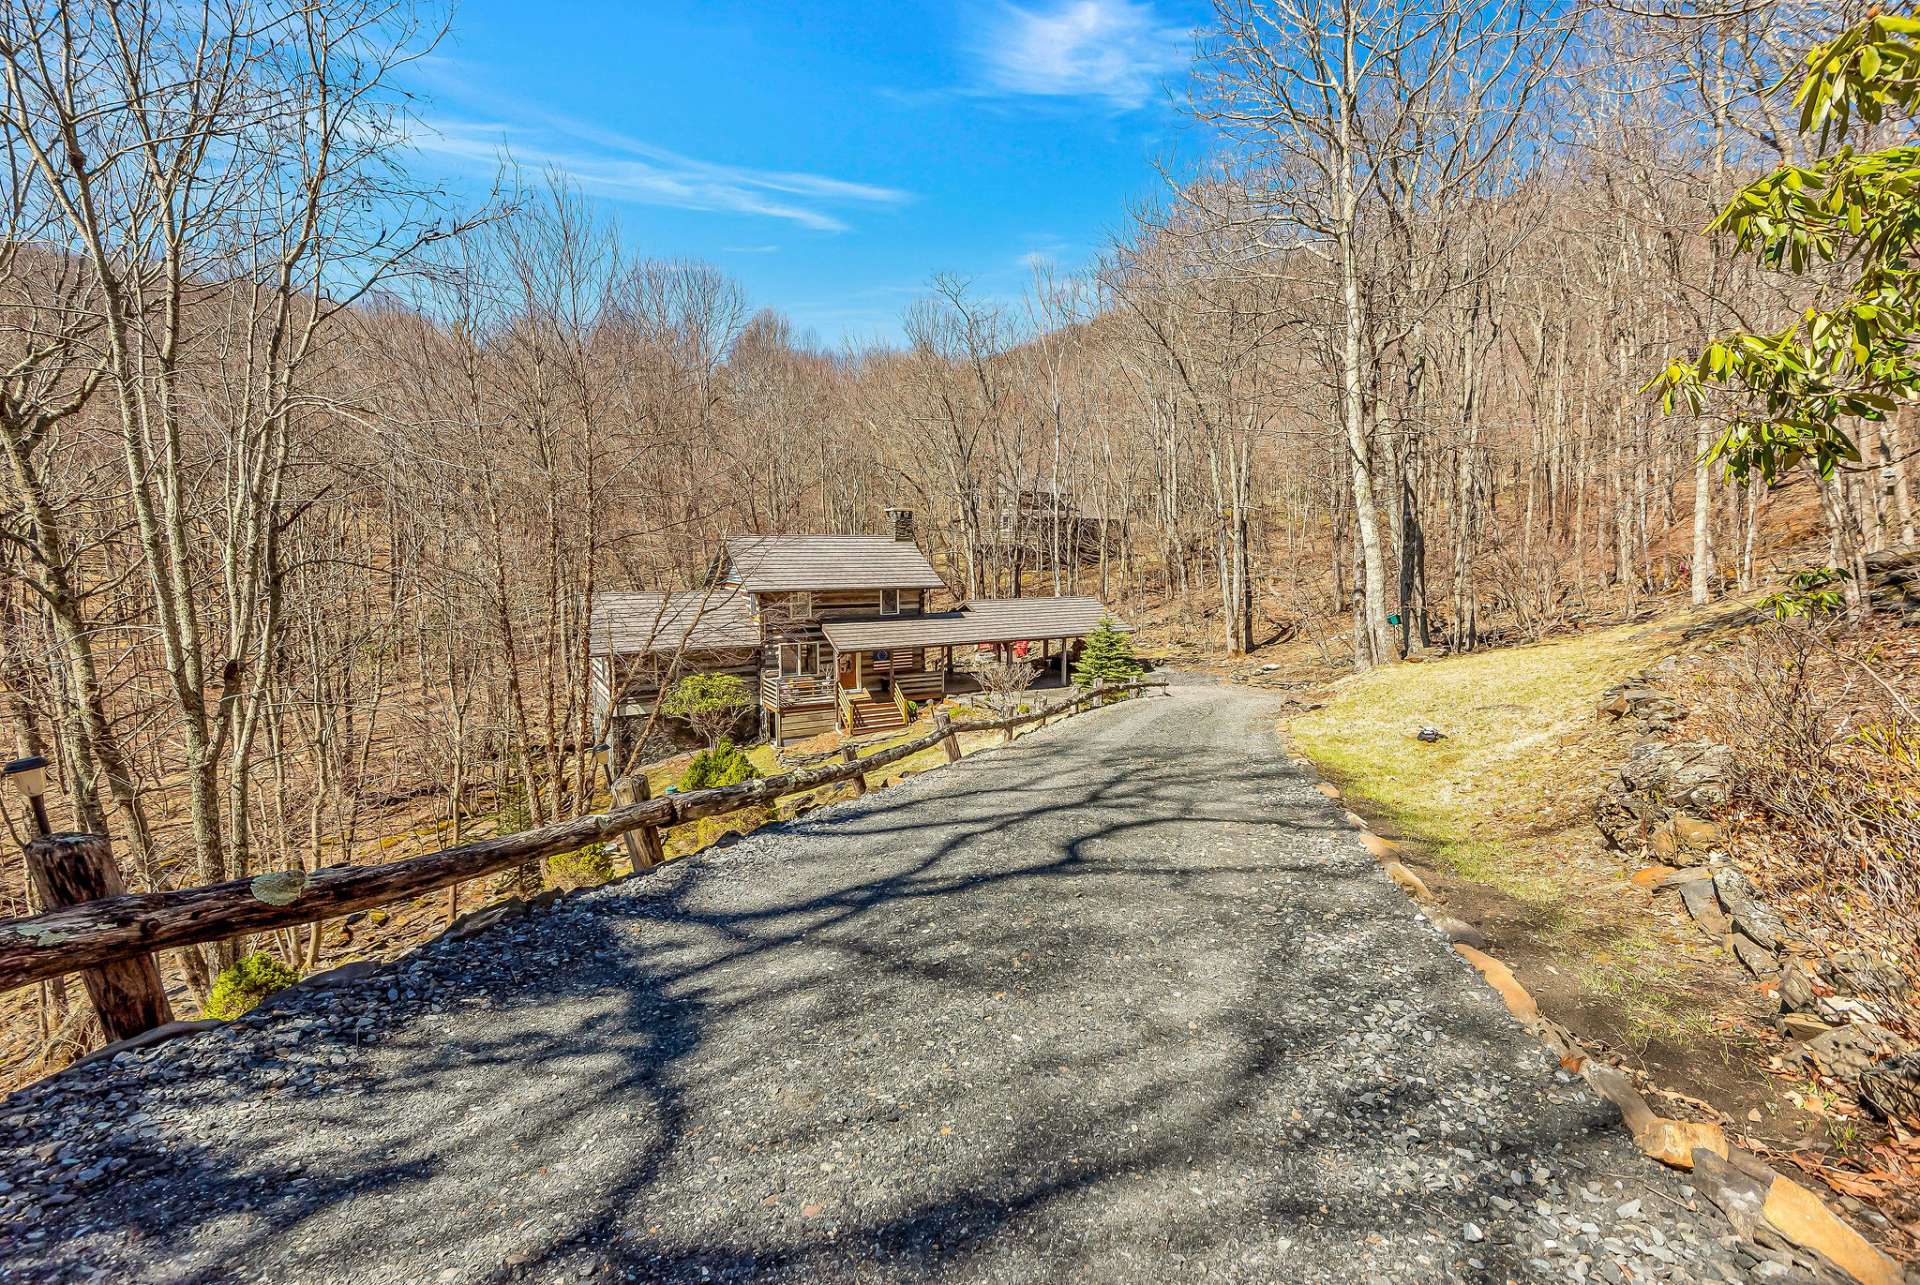 Private driveway leads down to the cabin set against a backdrop of serene natural beauty and a noisy mountain stream.